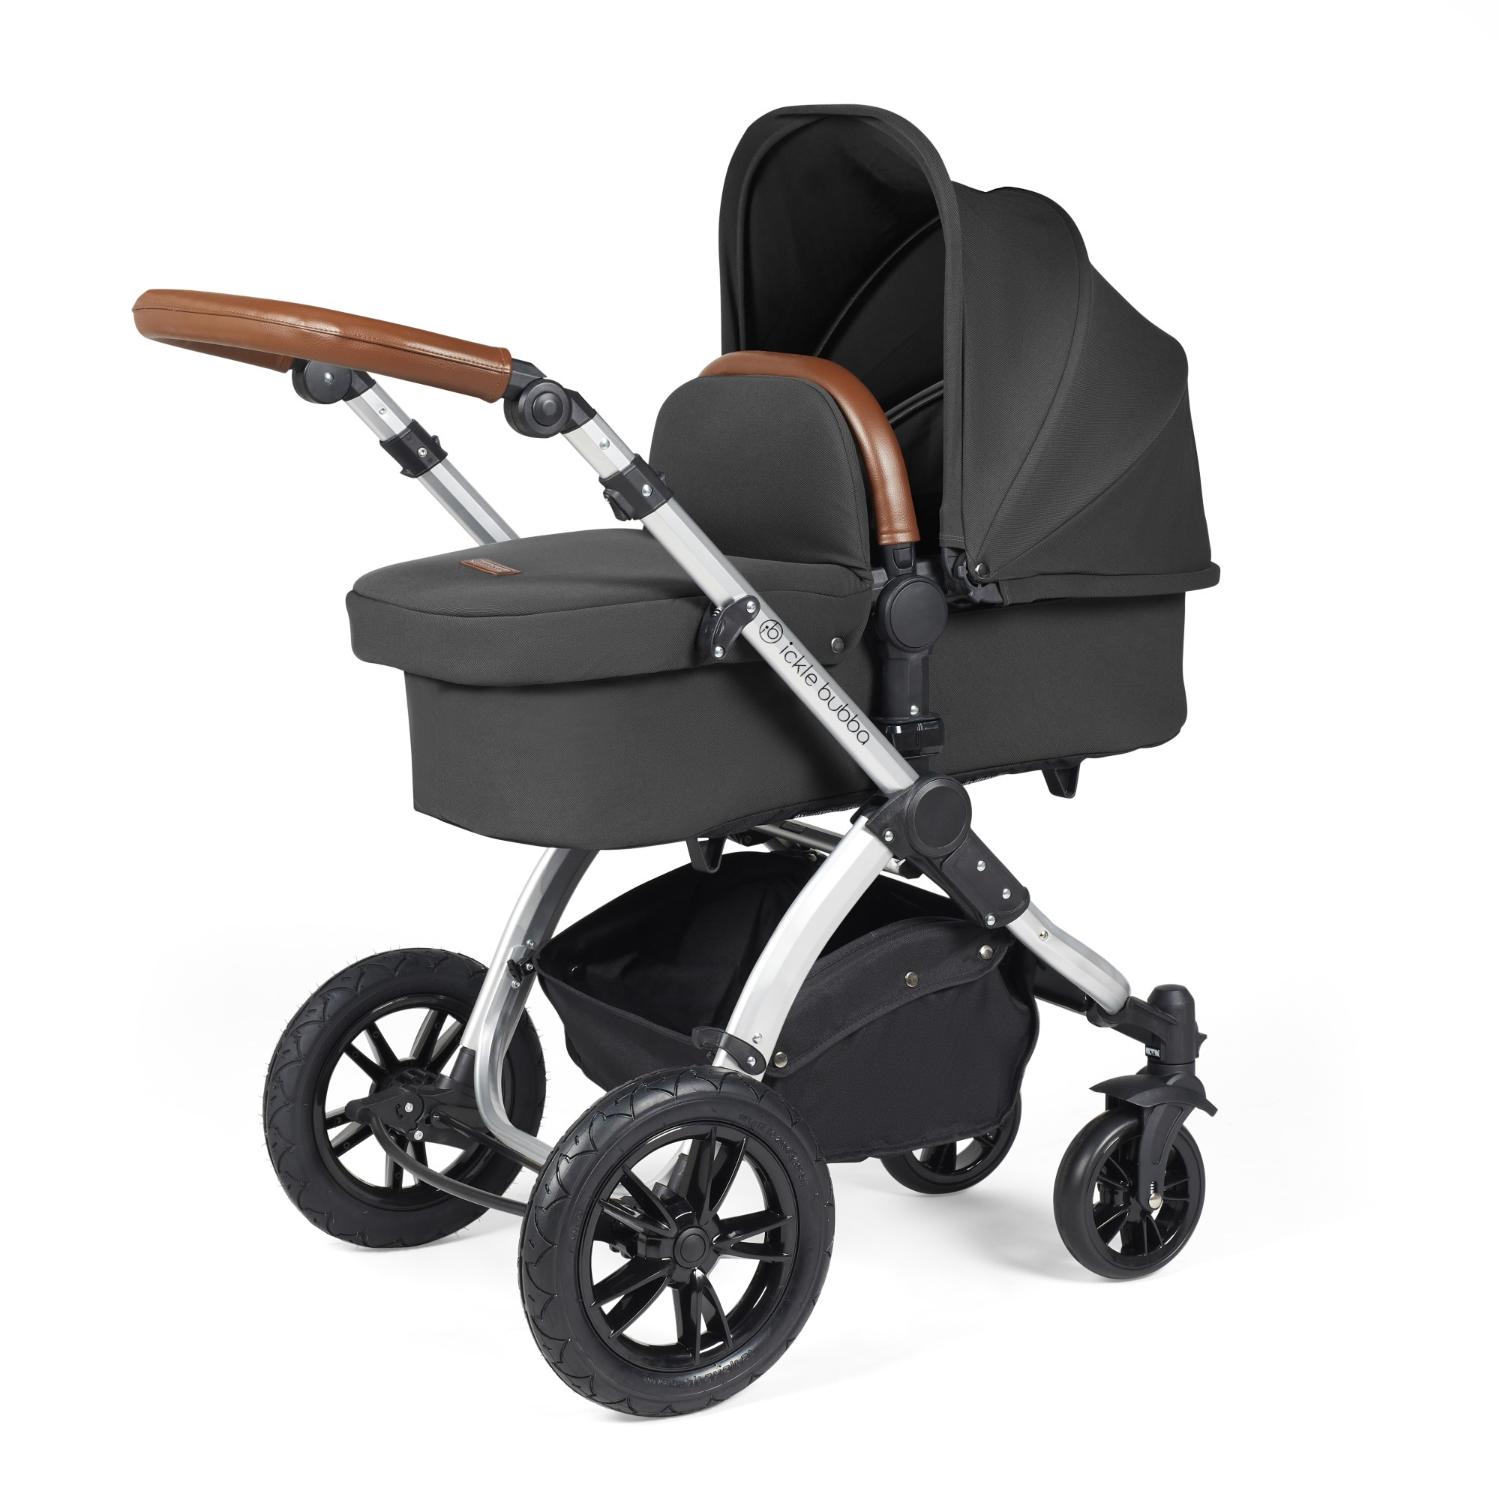 Ickle Bubba Stomp Luxe Pushchair with carrycot in Charcoal Grey colour